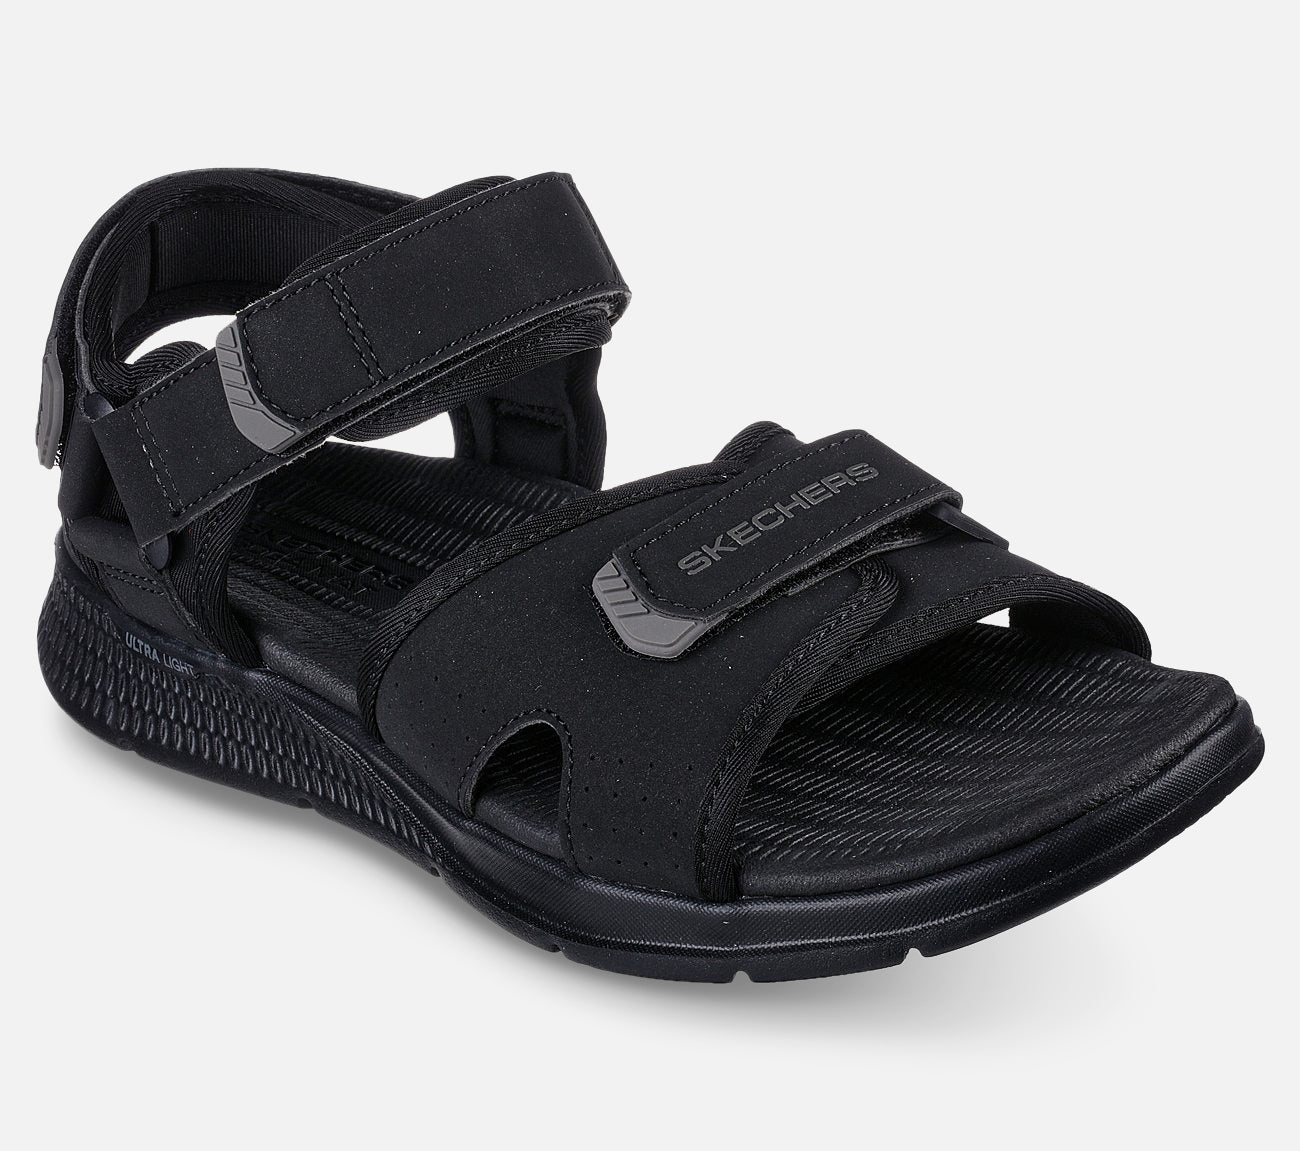 GO Consistent Sandal - Tributary